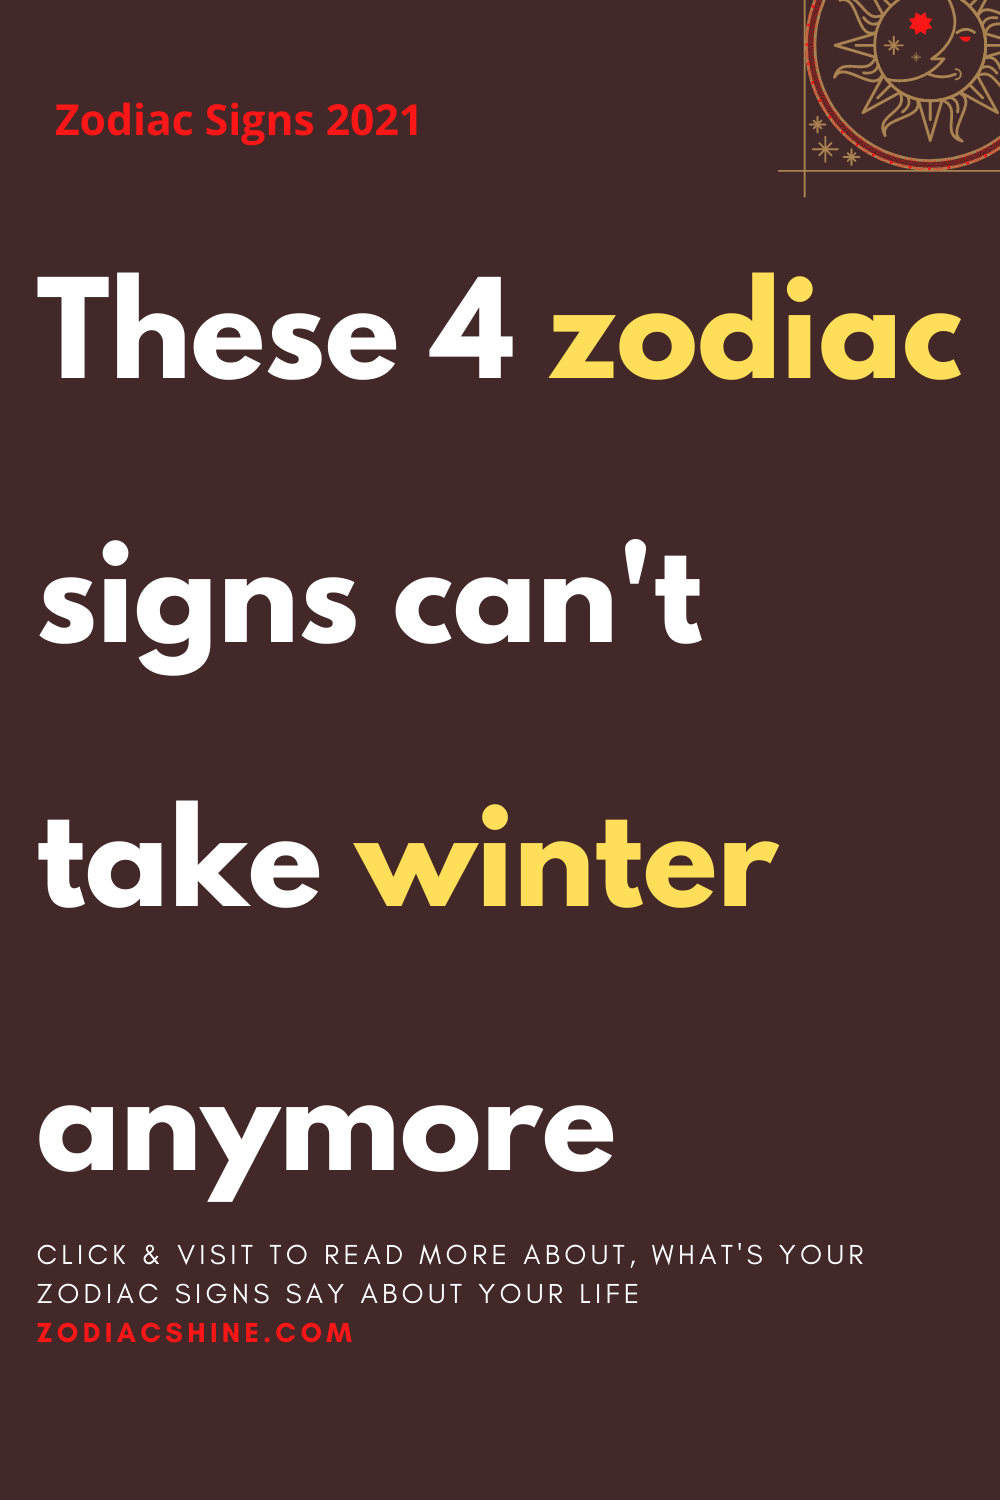 These 4 zodiac signs can't take winter anymore